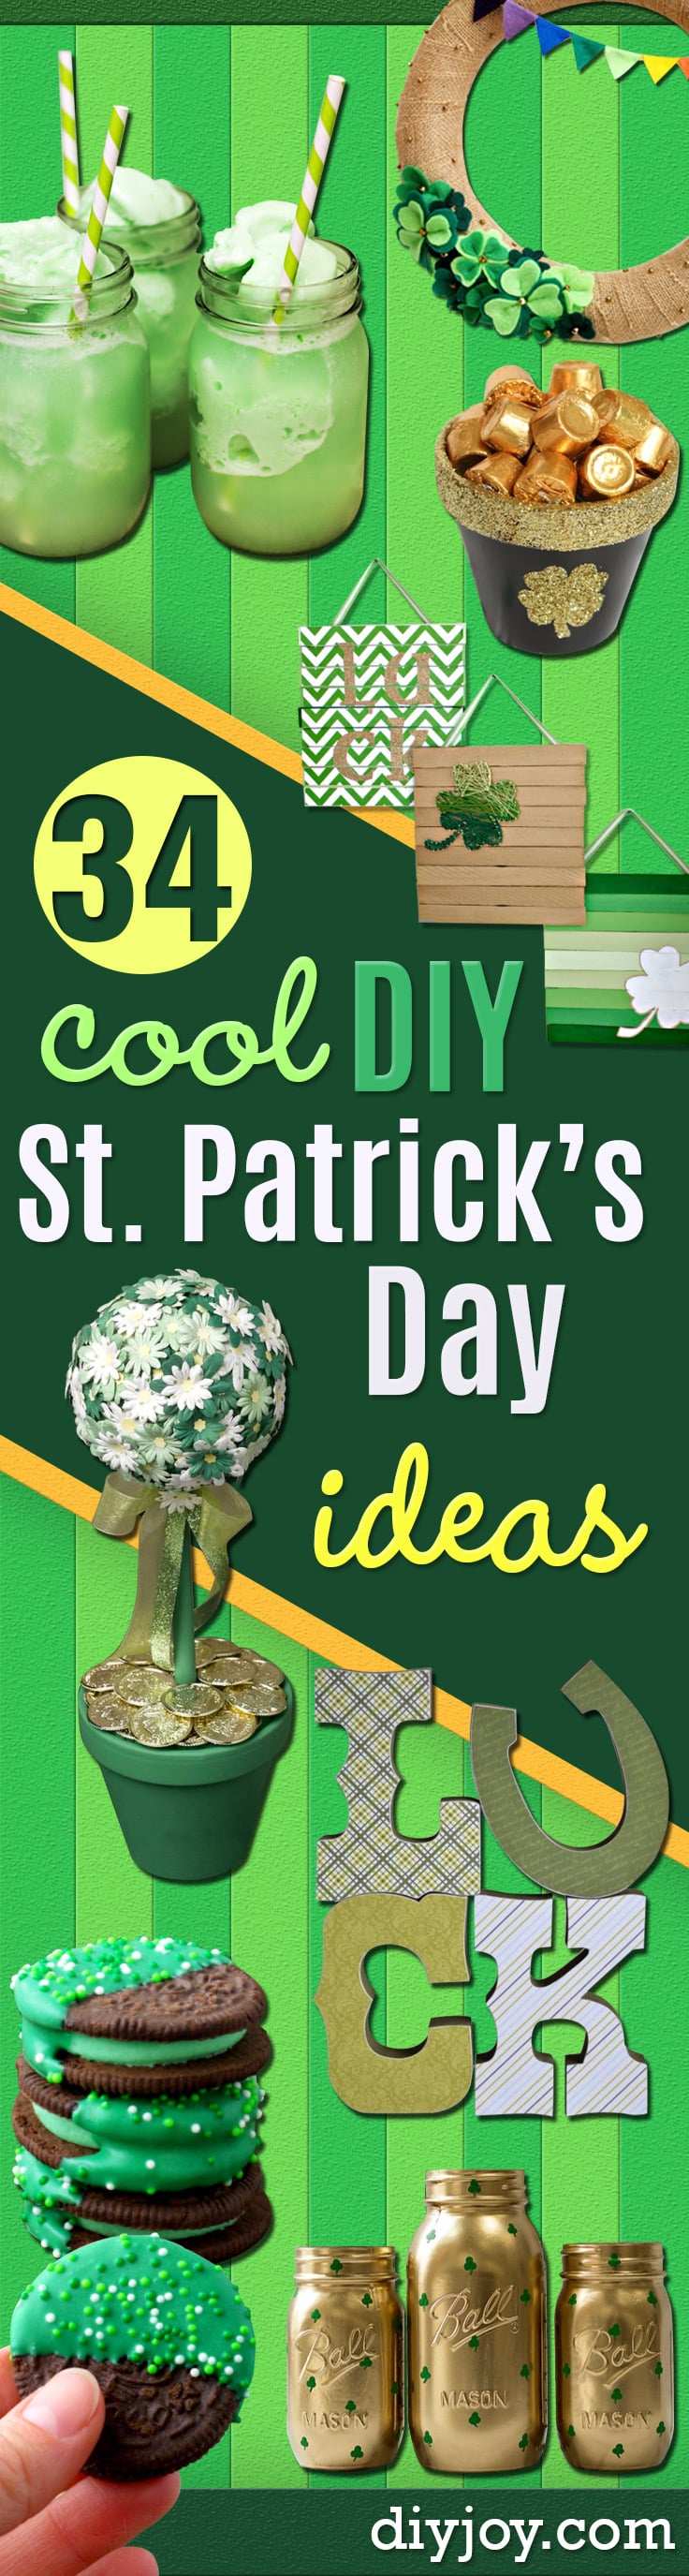 DIY St Patricks Day Ideas - Food and Best Recipes, Decorations and Home Decor, Party Ideas - Cupcakes, Drinks, Festive St Patrick Day Parties With these Easy, Quick and Cool Crafts and DIY Projects http://diyjoy.com/st-patricks-day-ideas